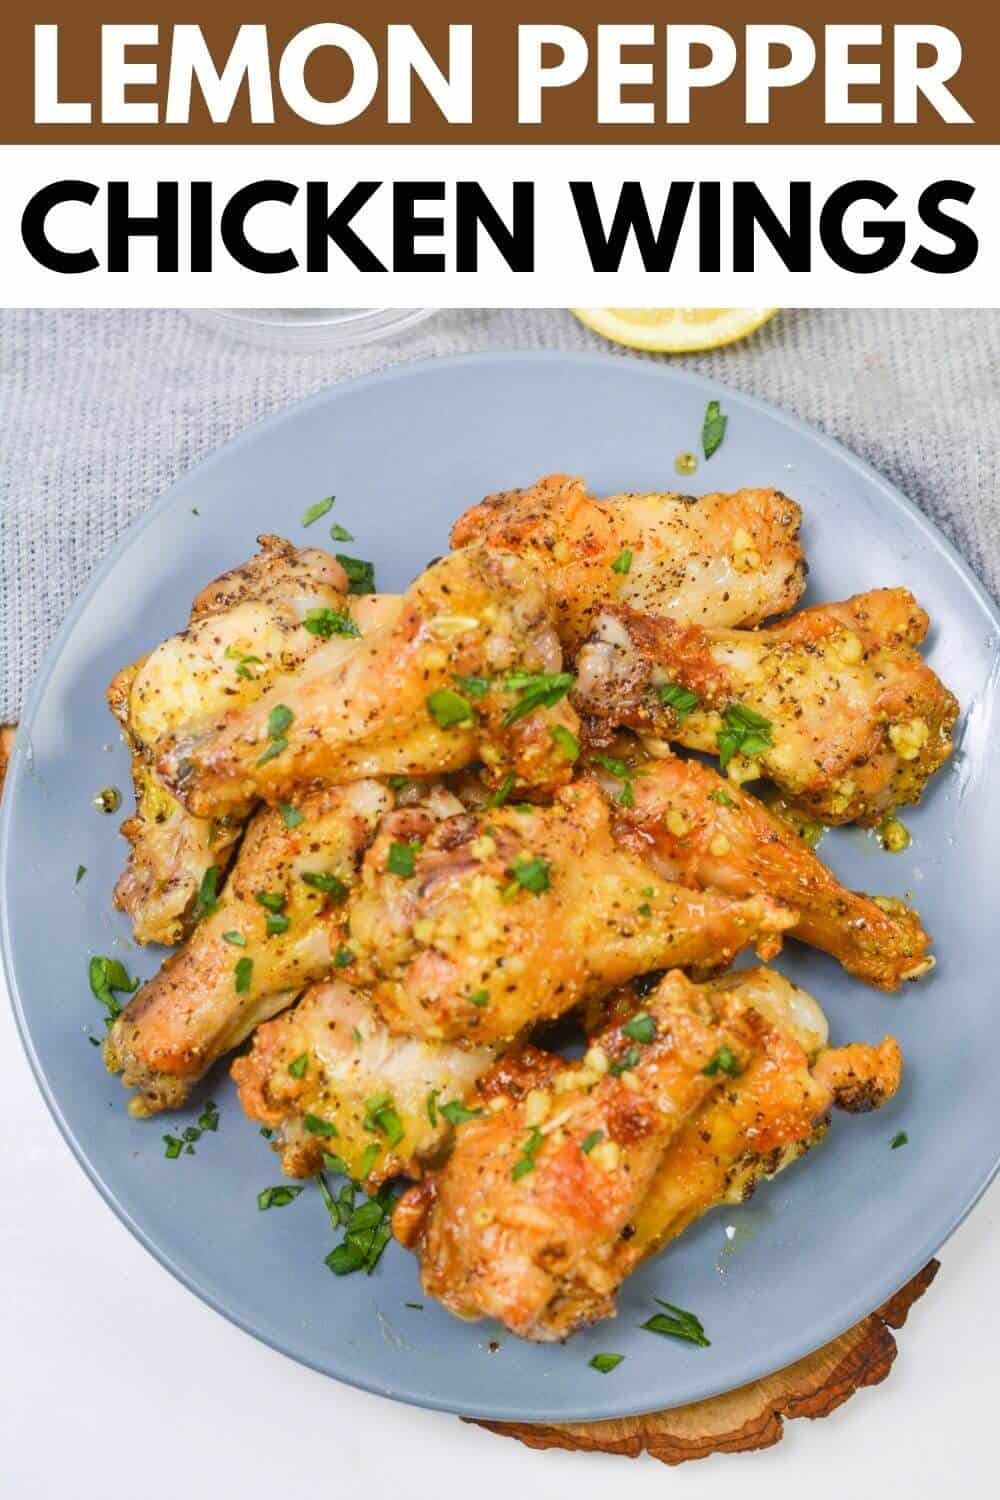 Lemon pepper wings with recipe title text overlay.